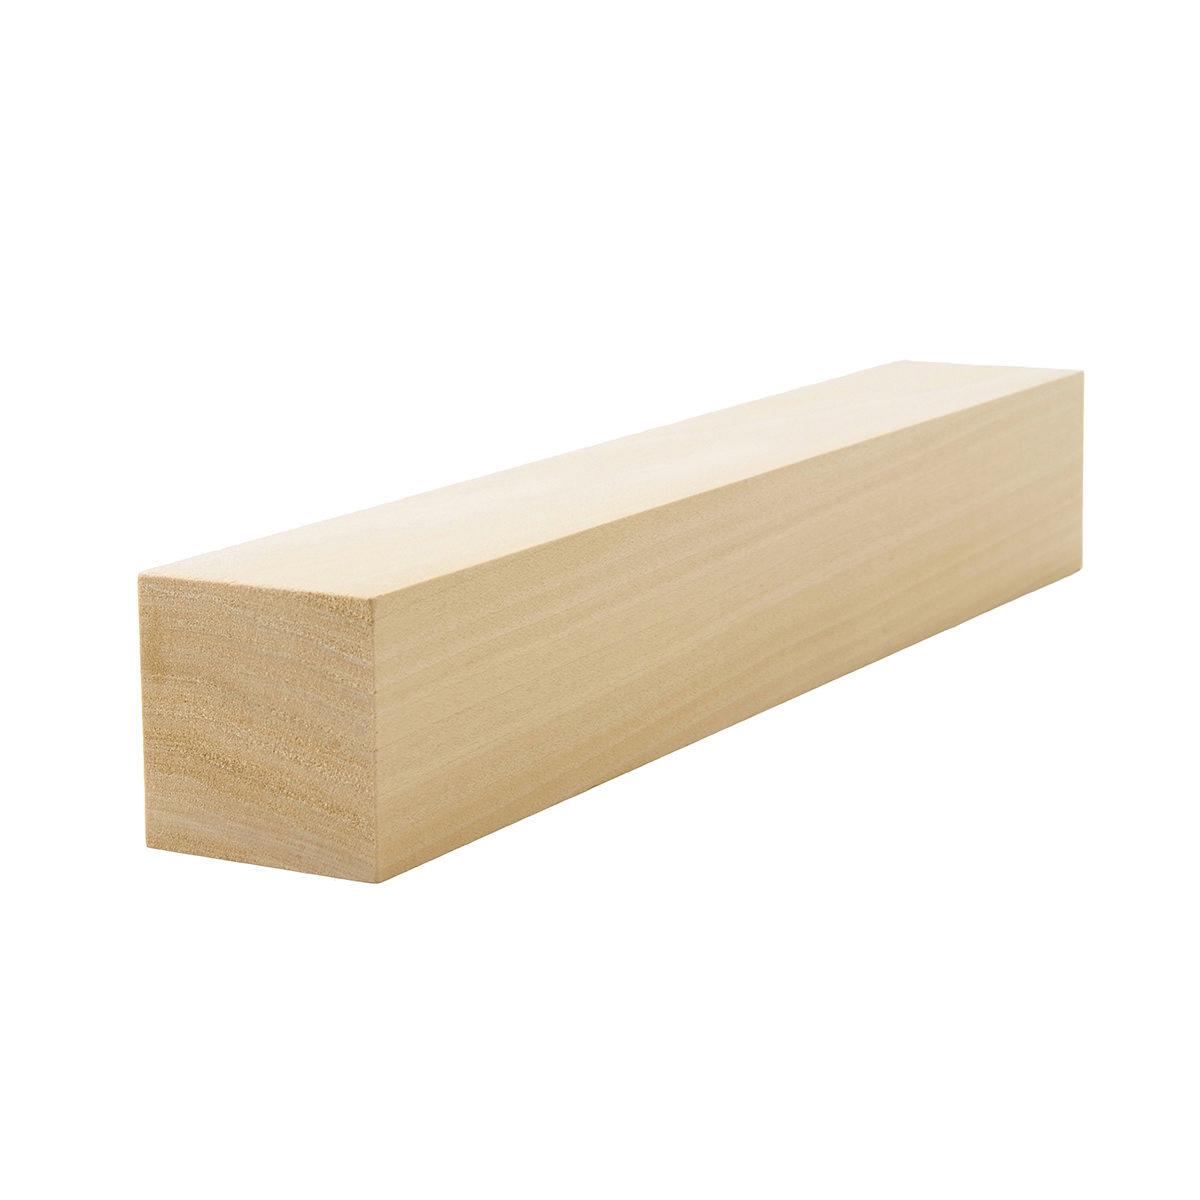 2x2 (13/4" x 13/4") Hard Maple S4S Lumber & Square Stock from Baird Brothers